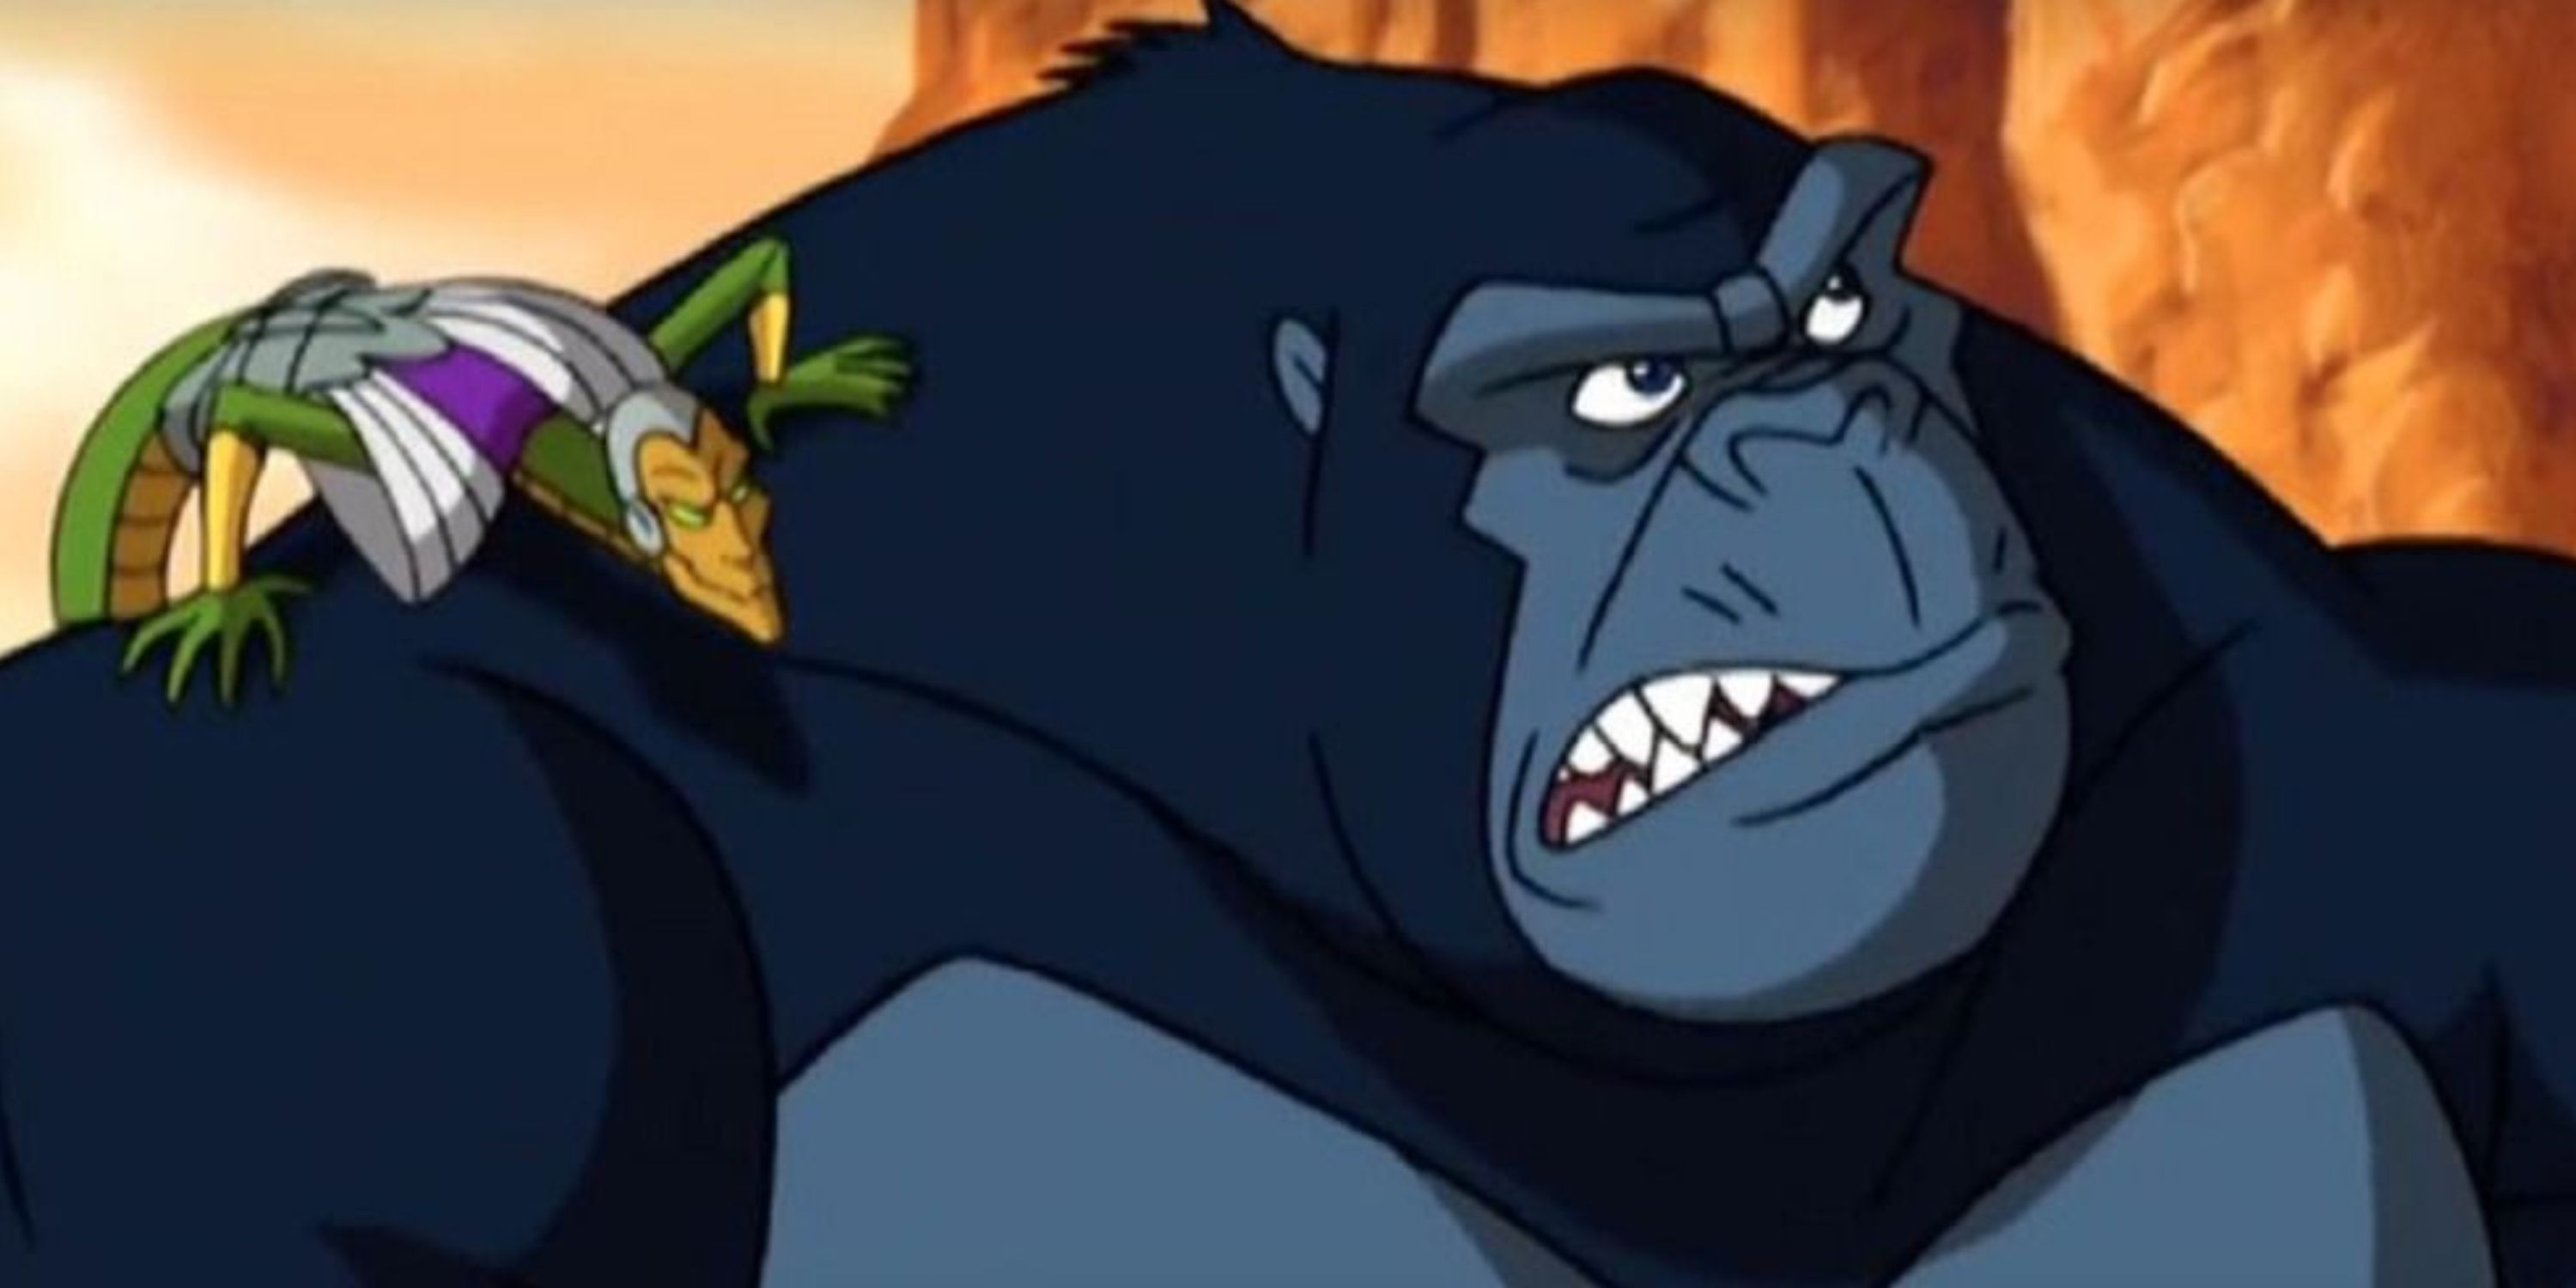 A close-up of King Kong with a lizard-like creature on his shoulder in the animated film Kong: King of Atlantis